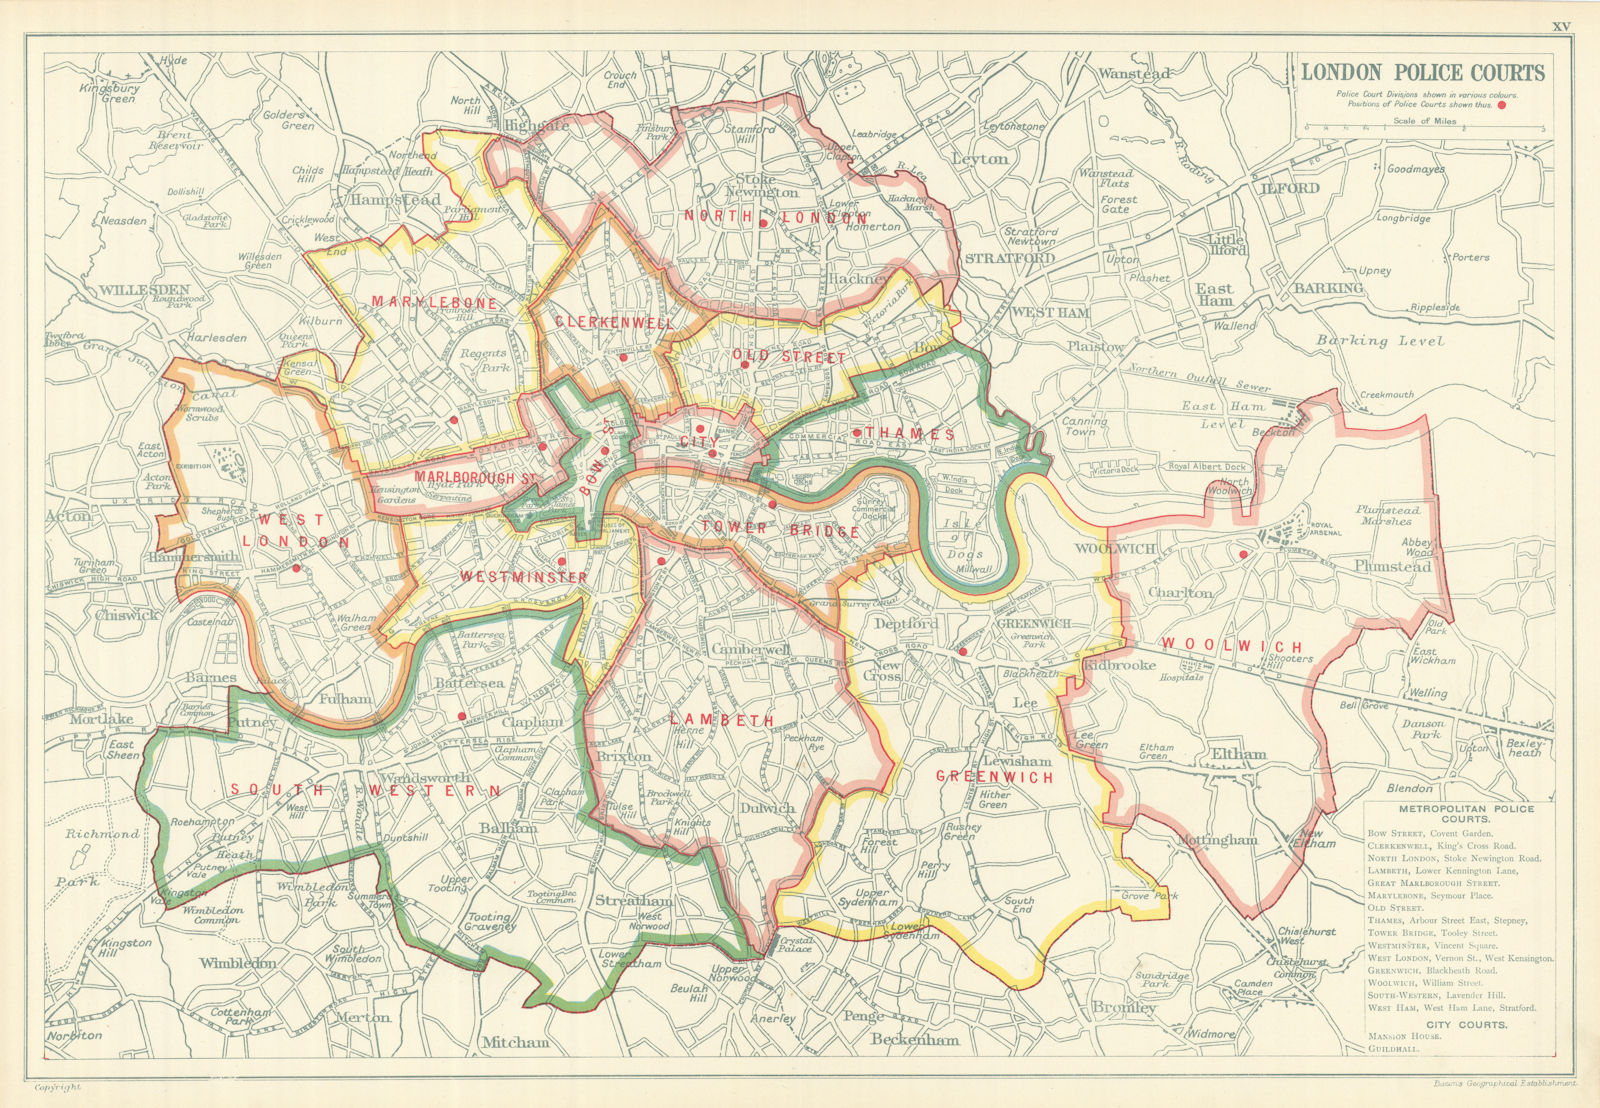 LONDON POLICE COURTS. Showing divisions & court locations. BACON 1919 old map